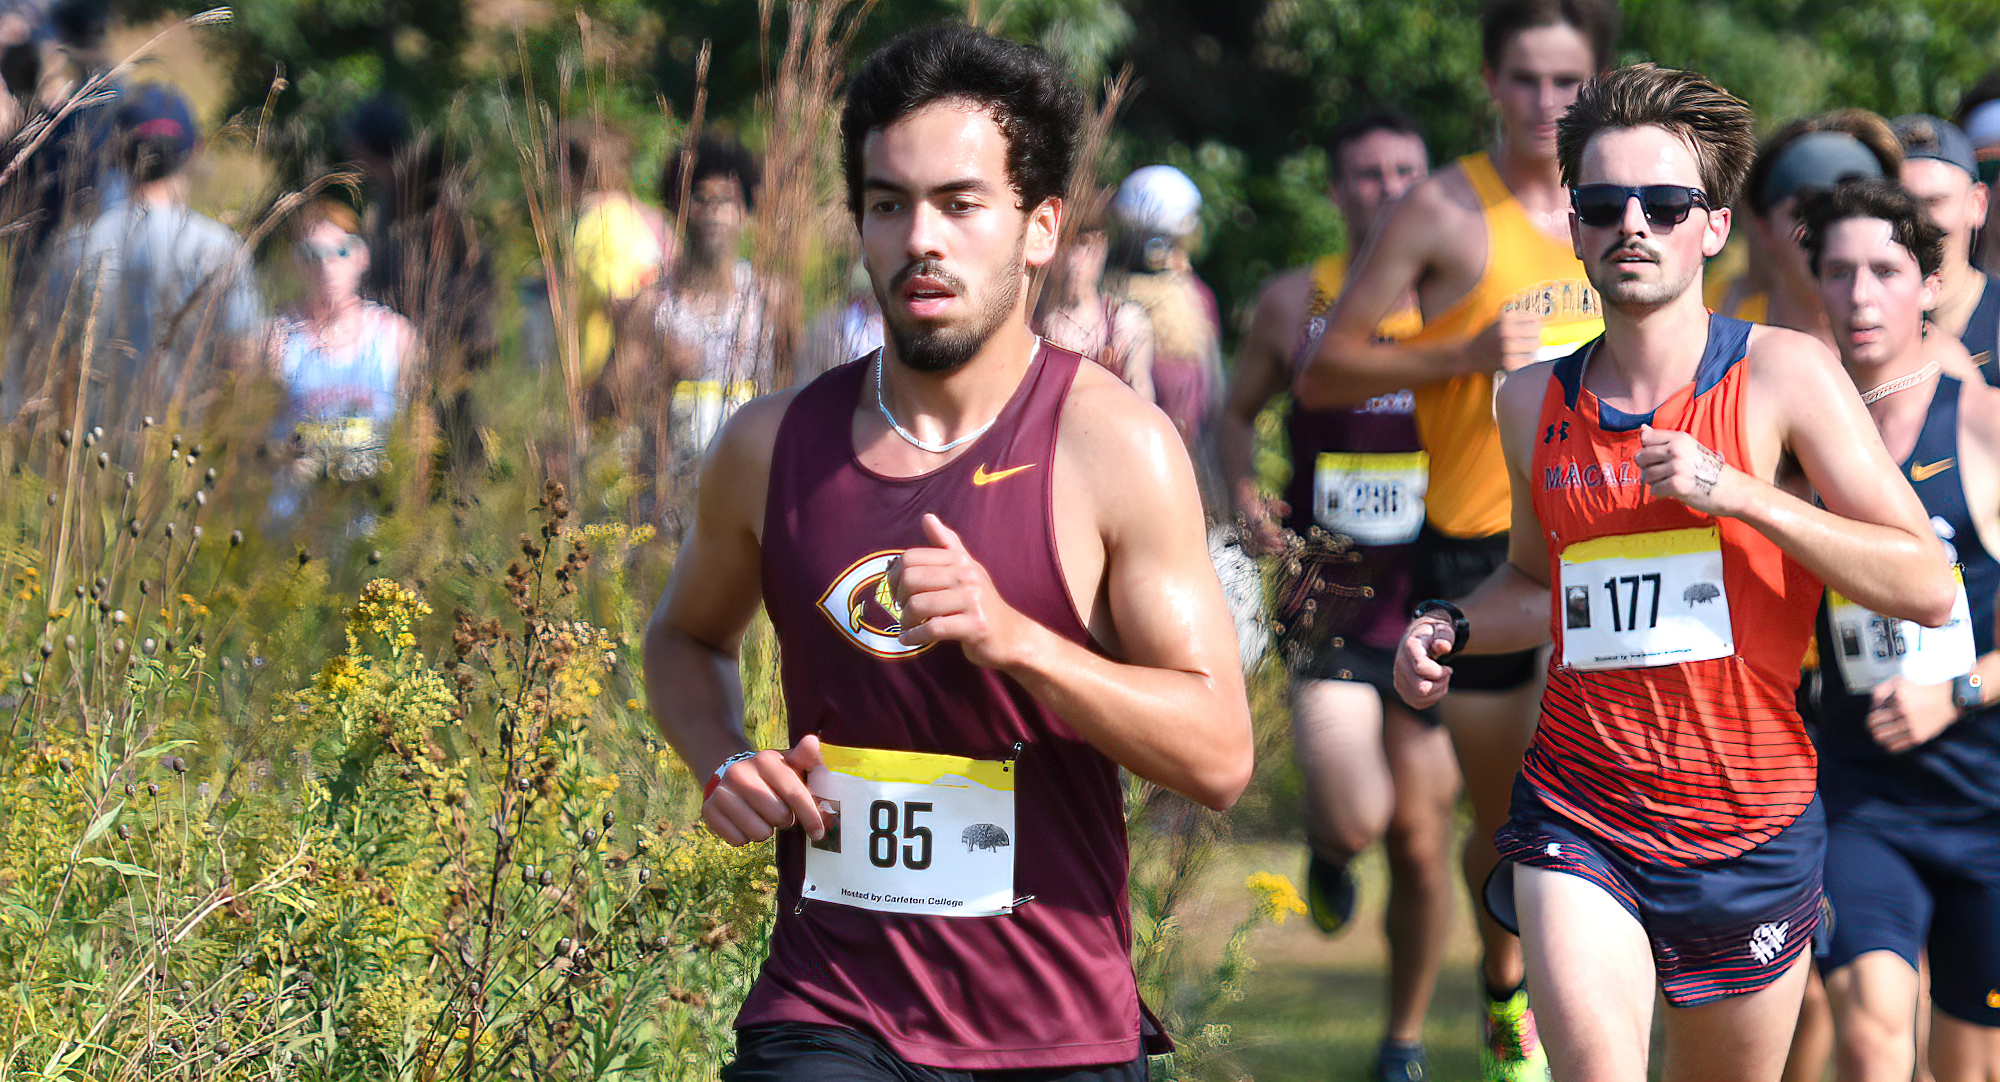 Senior Lucas Hinojos ran a 41-second personal best at the UW-La Crosse Meet and helped the Cobbers finish 13th in the team standings.